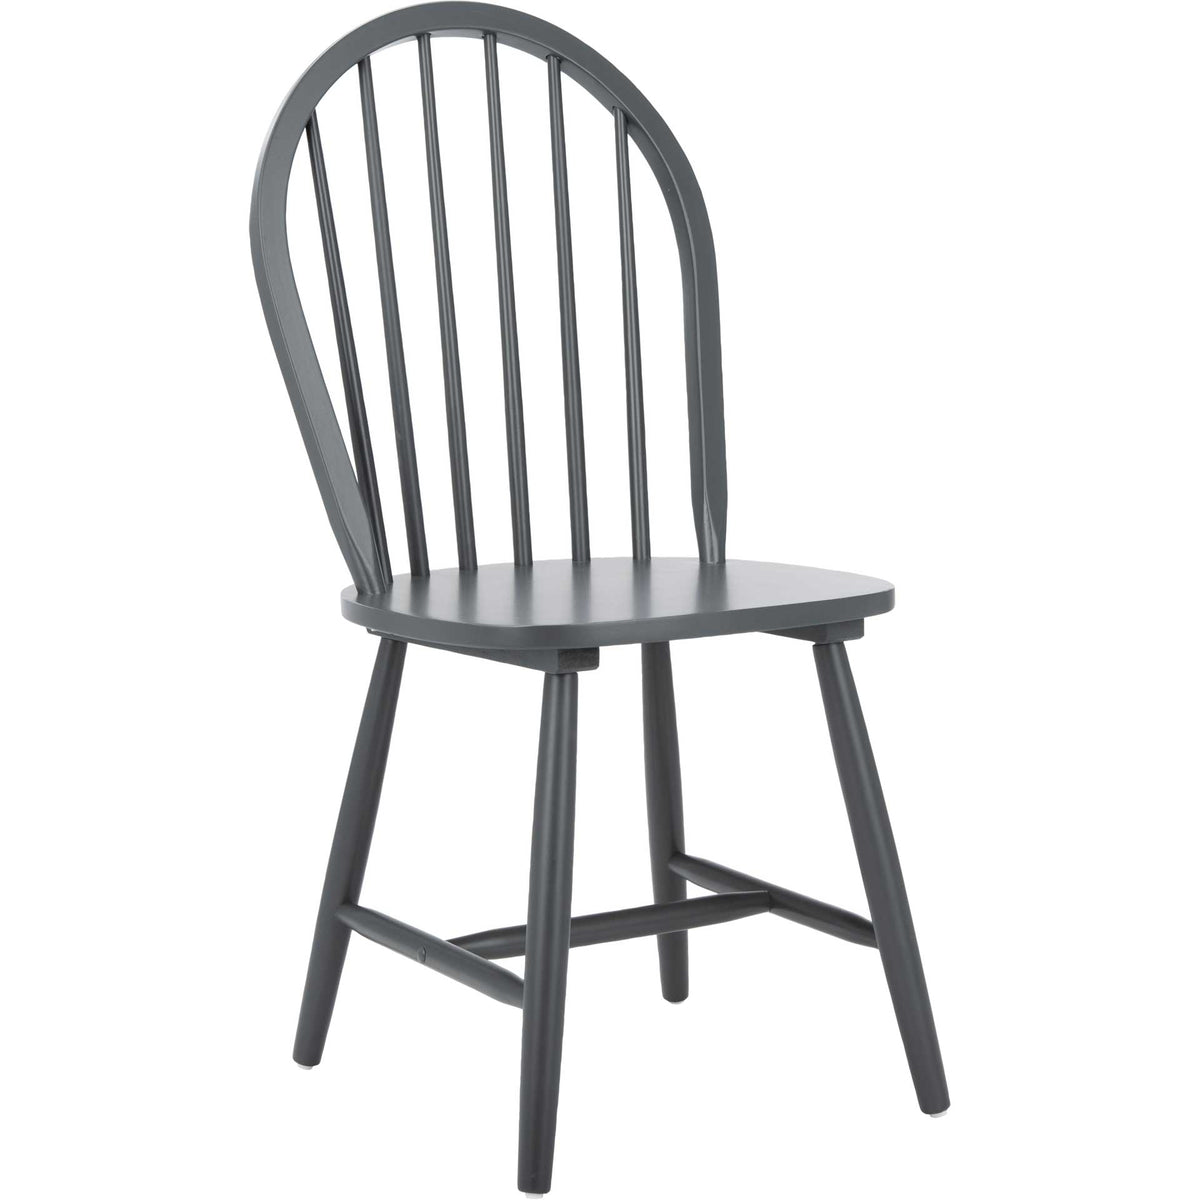 Calista Spindle Back Chair Gray (Set of 2)